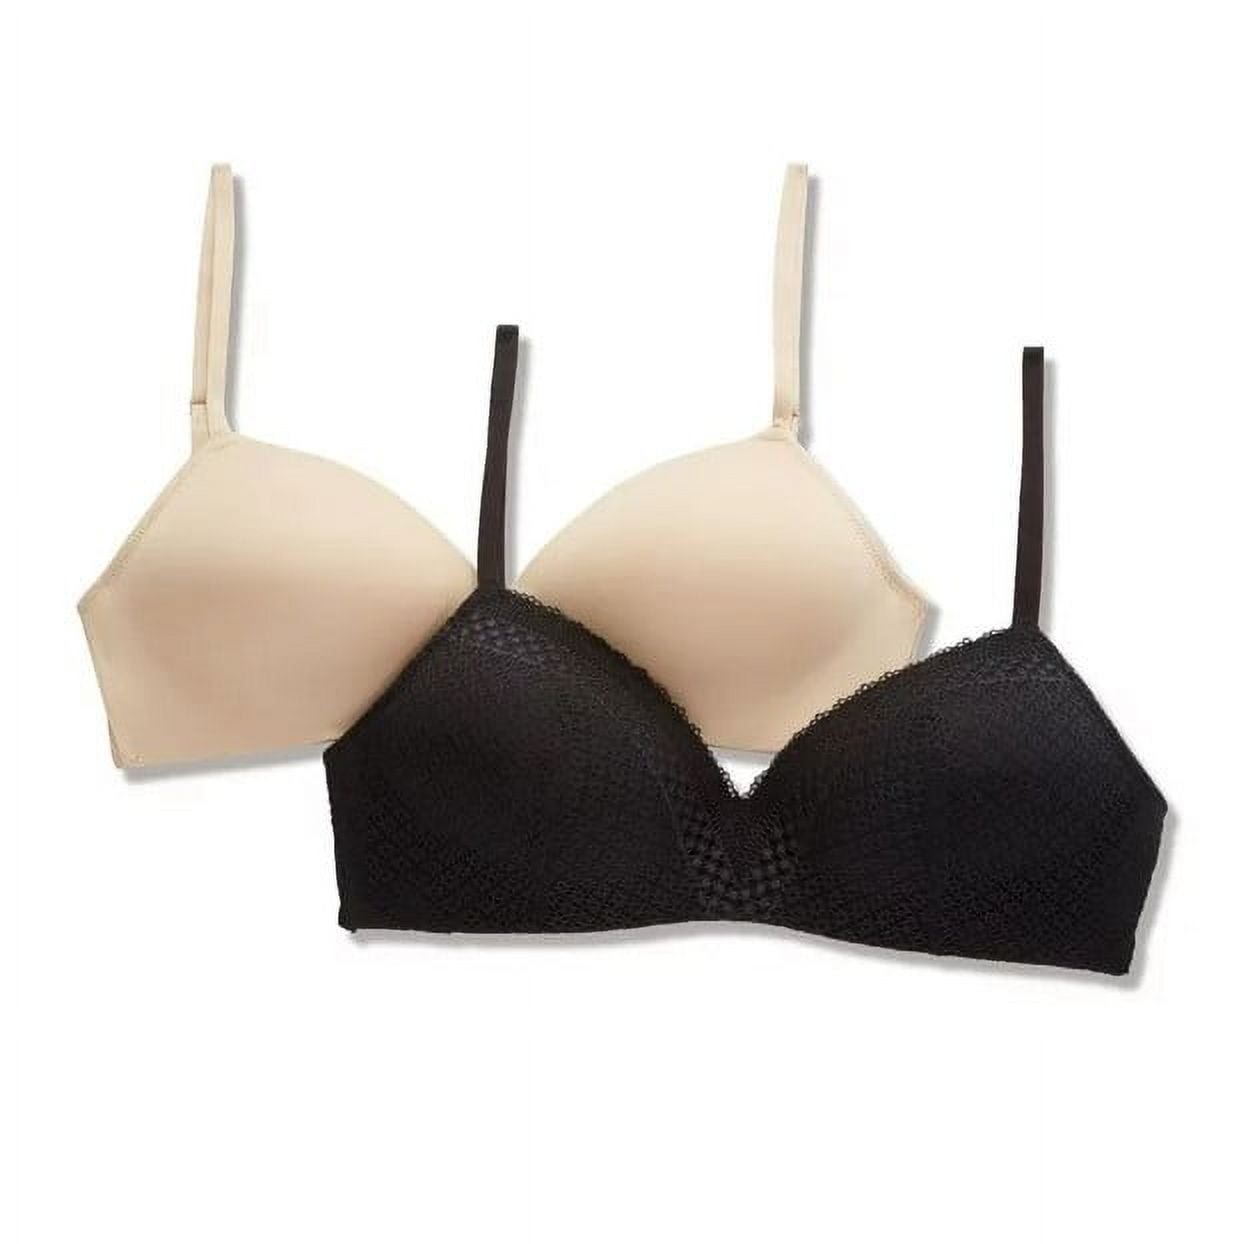 Maidenform Self Expressions Women's 2-Pack Push-Up Bra SE5701